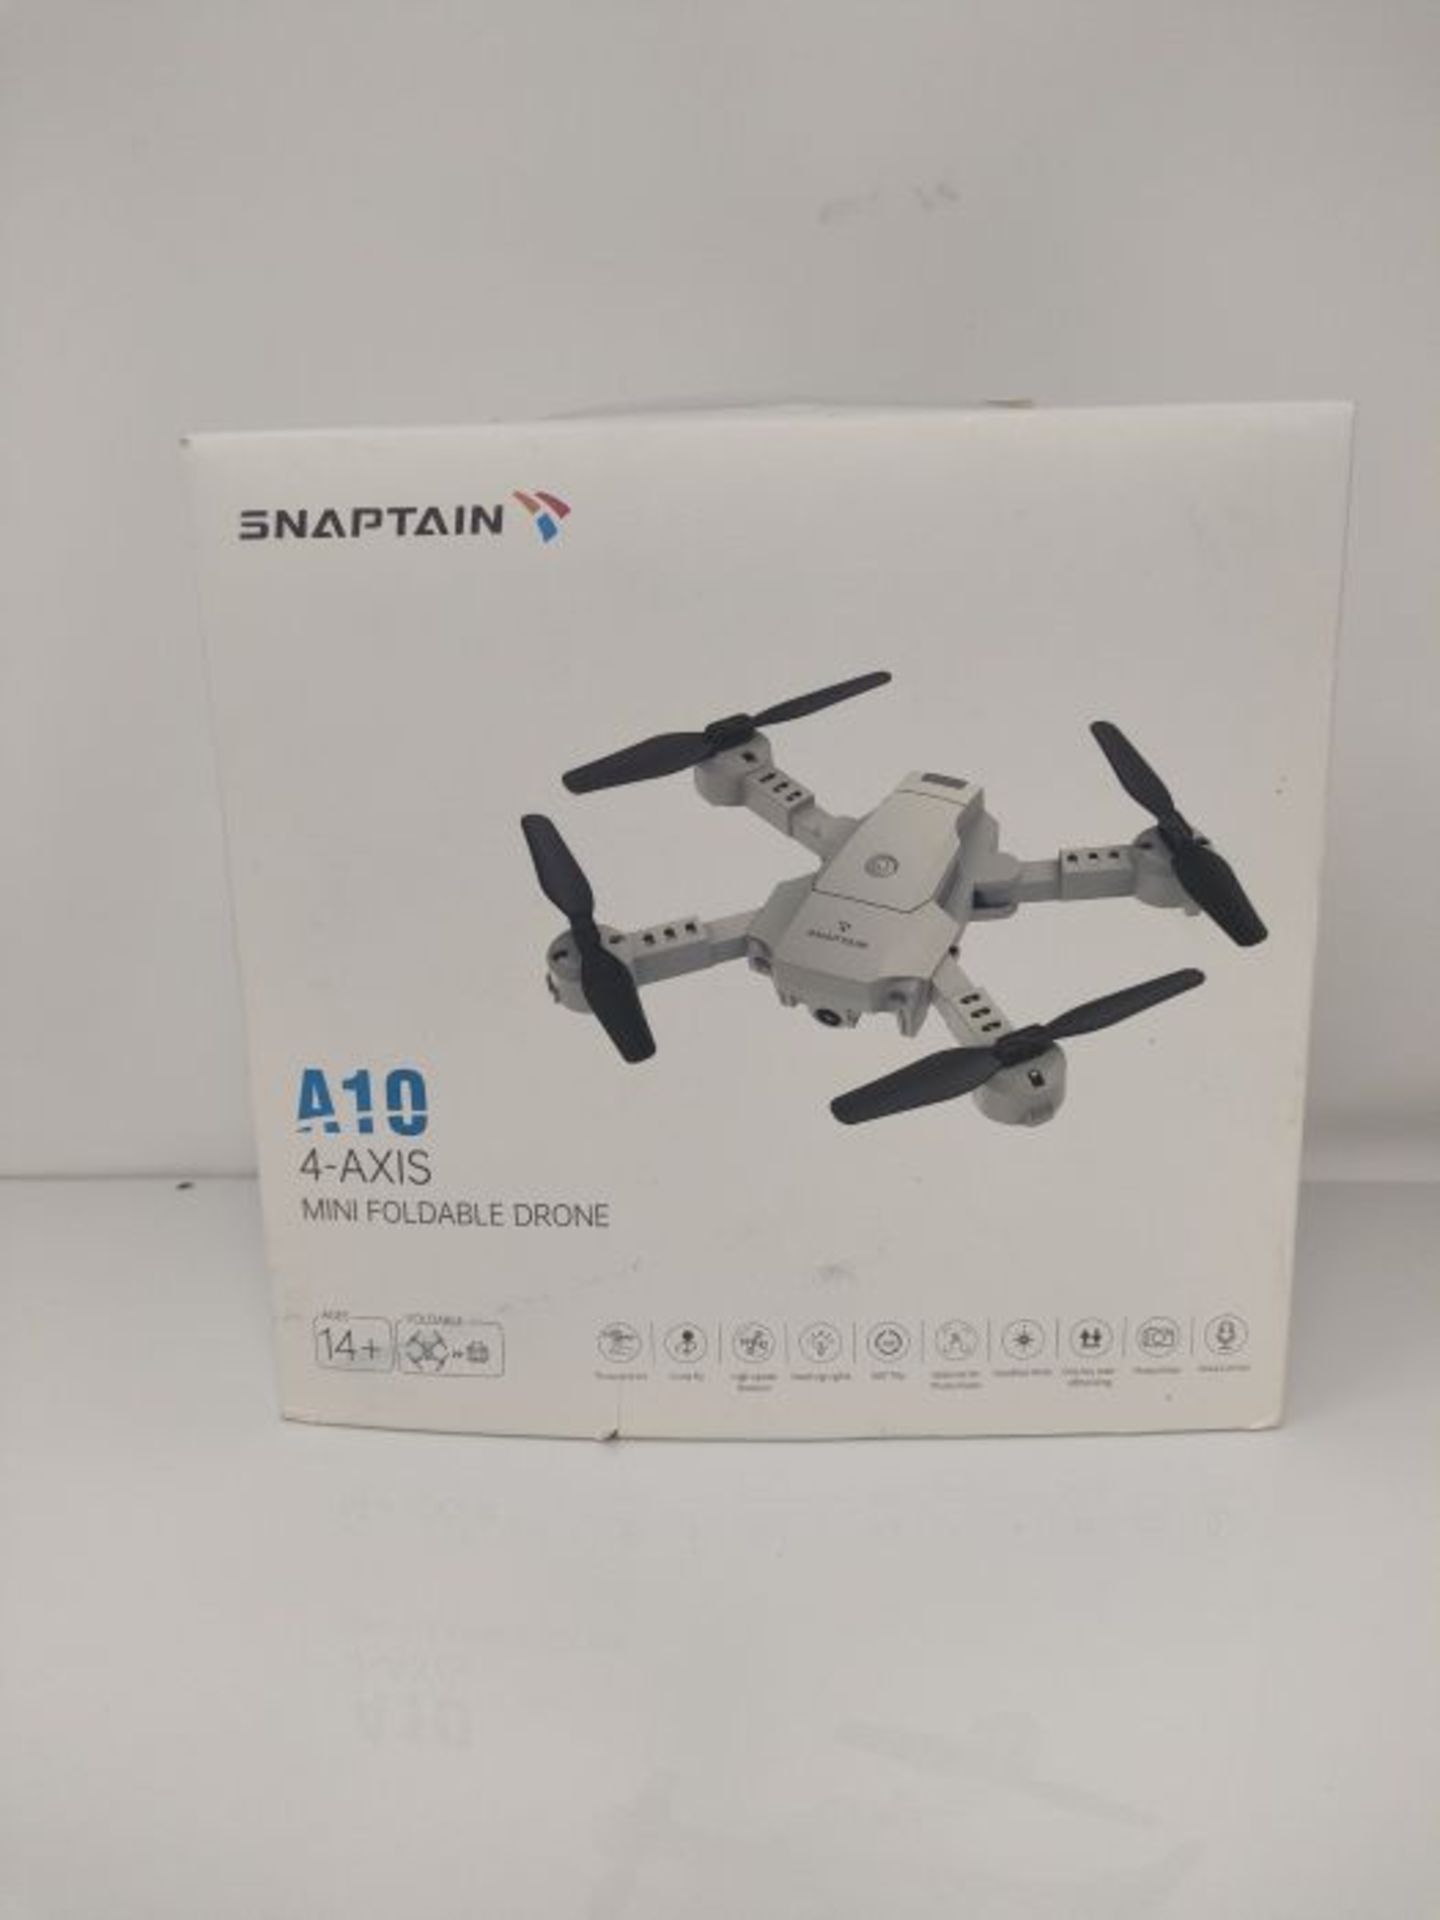 SNAPTAIN A10 Mini Foldable Drone with 720P HD Camera FPV WiFi RC Quadcopter w/Voice Co